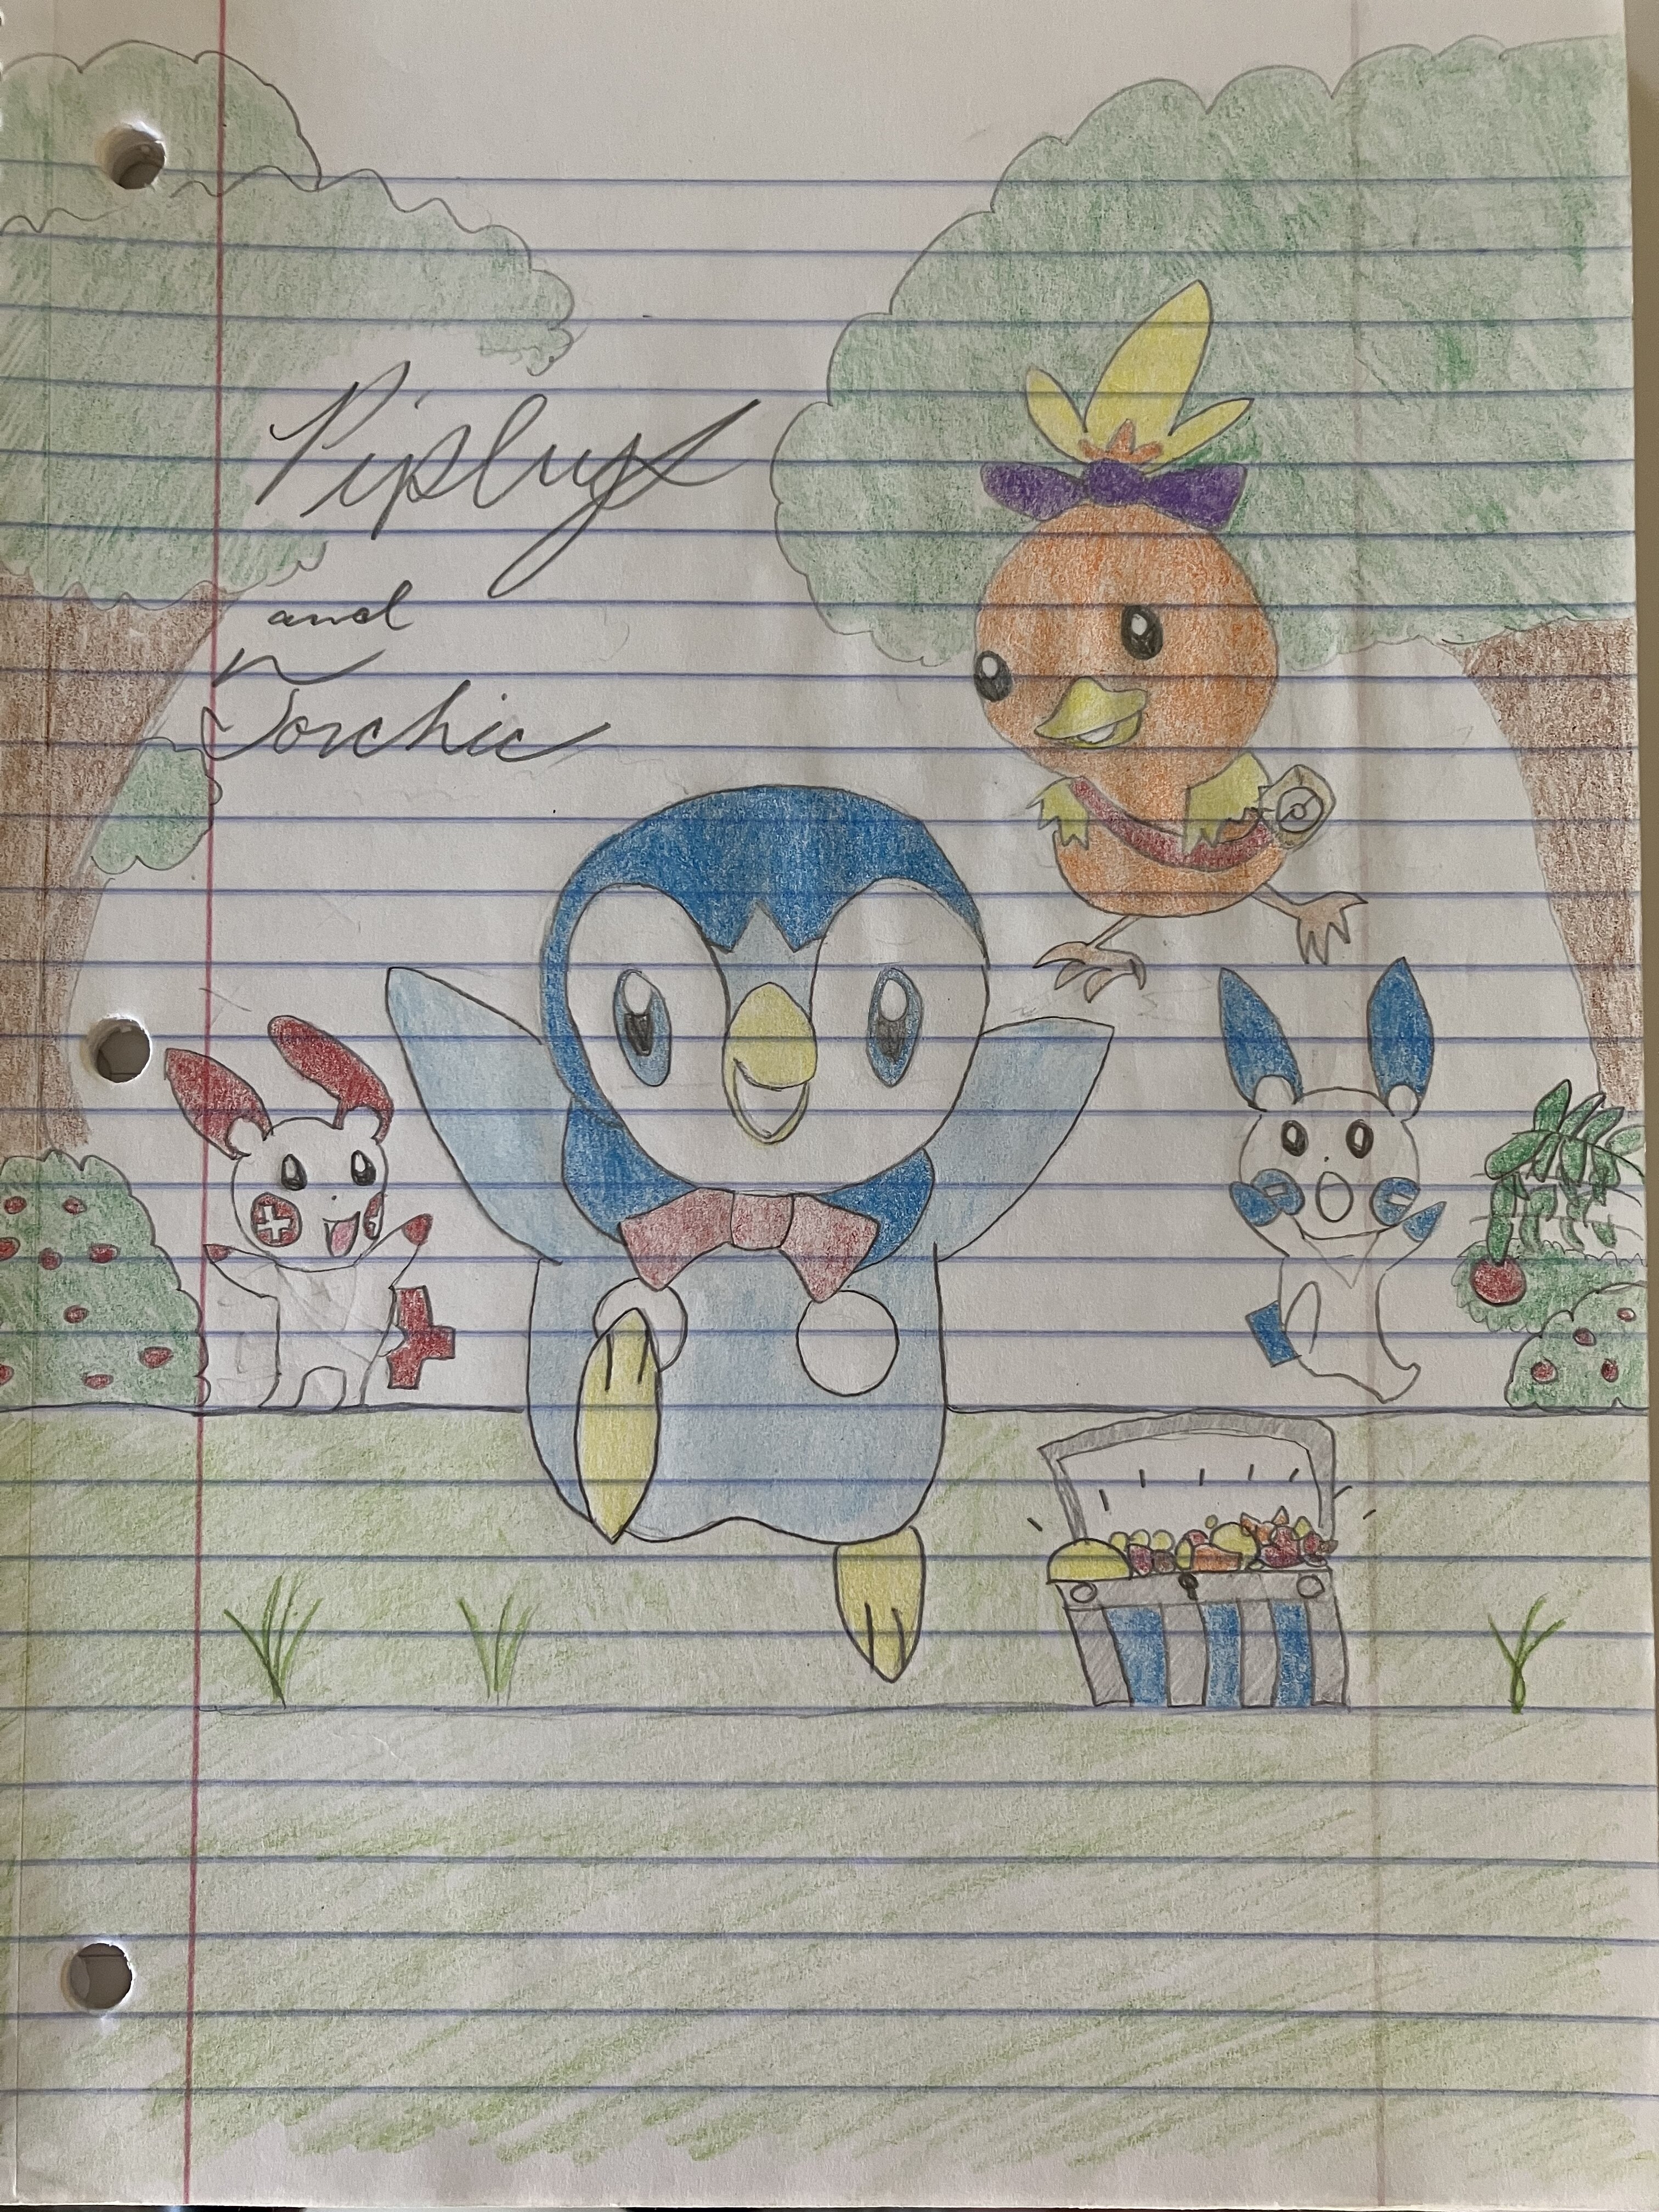 Piplup and Torchic.jpg